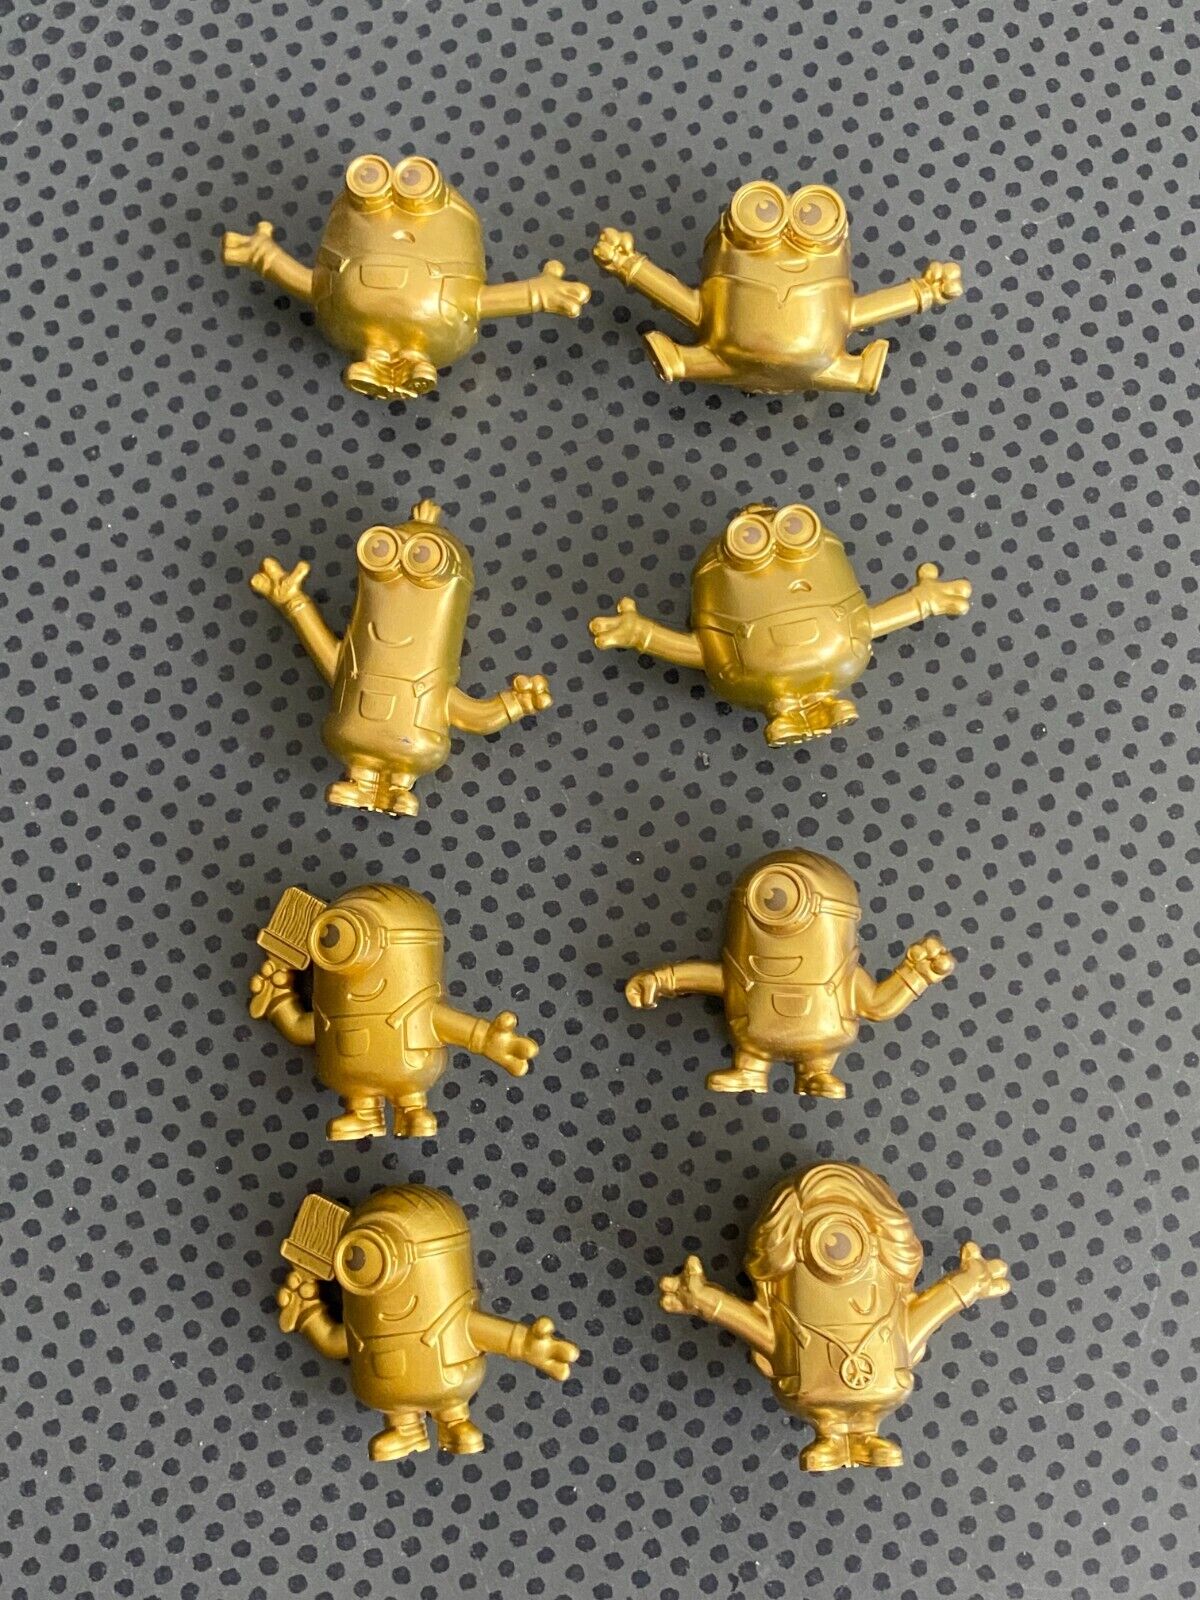 Set 8 Pcs McDonald’s Happy Meal Toy Minions 2019 figure in color gold